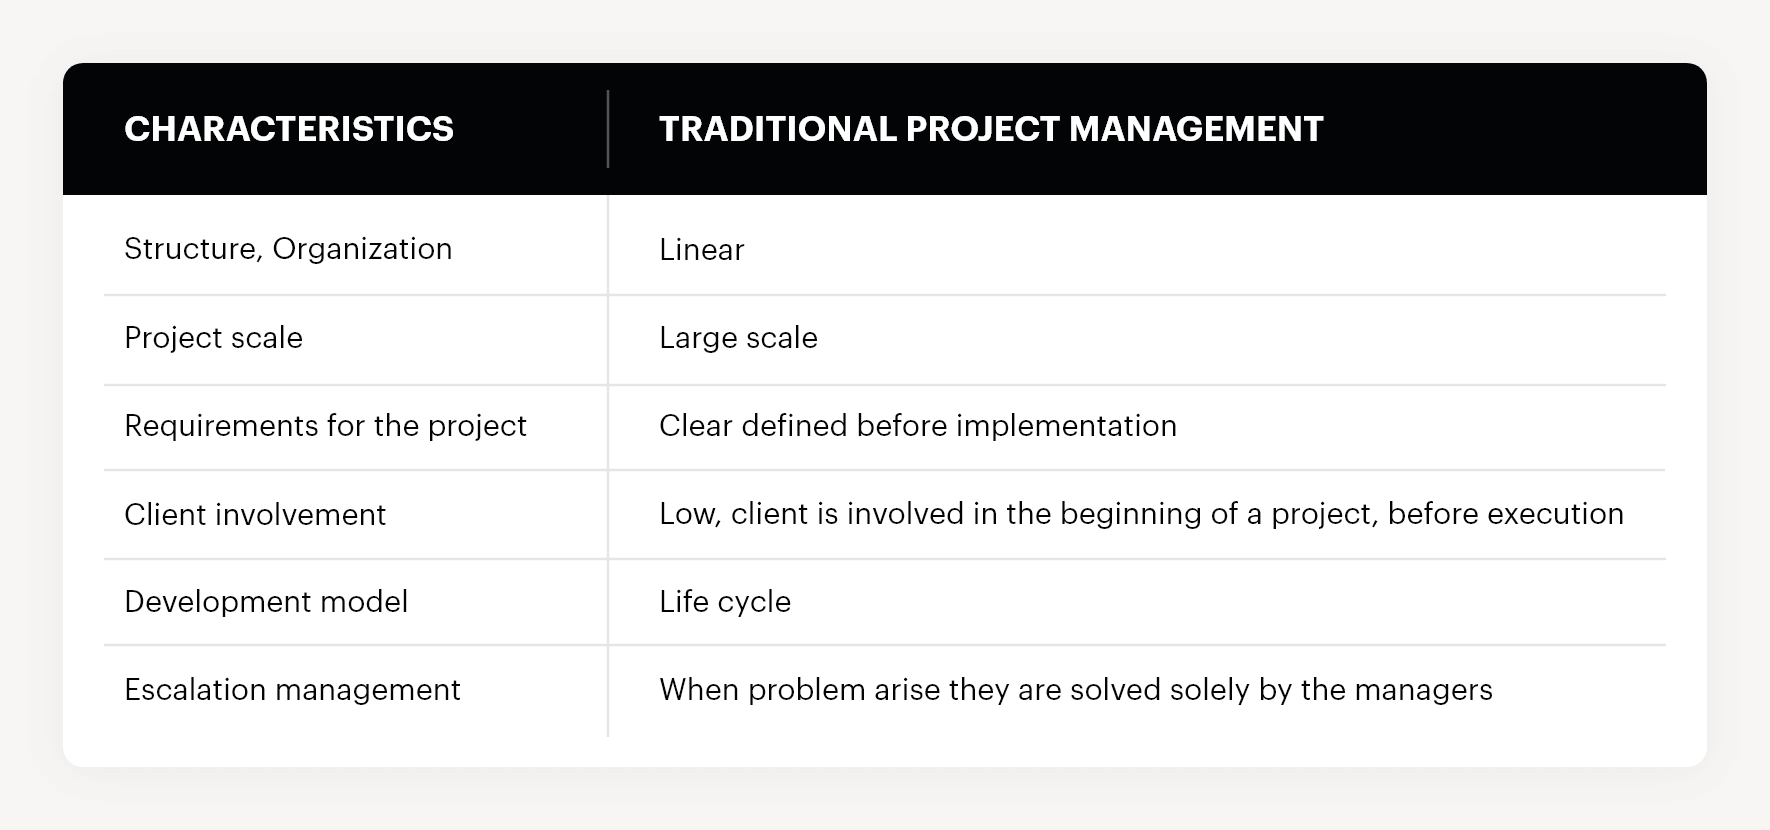 Main characteristics of traditional project management